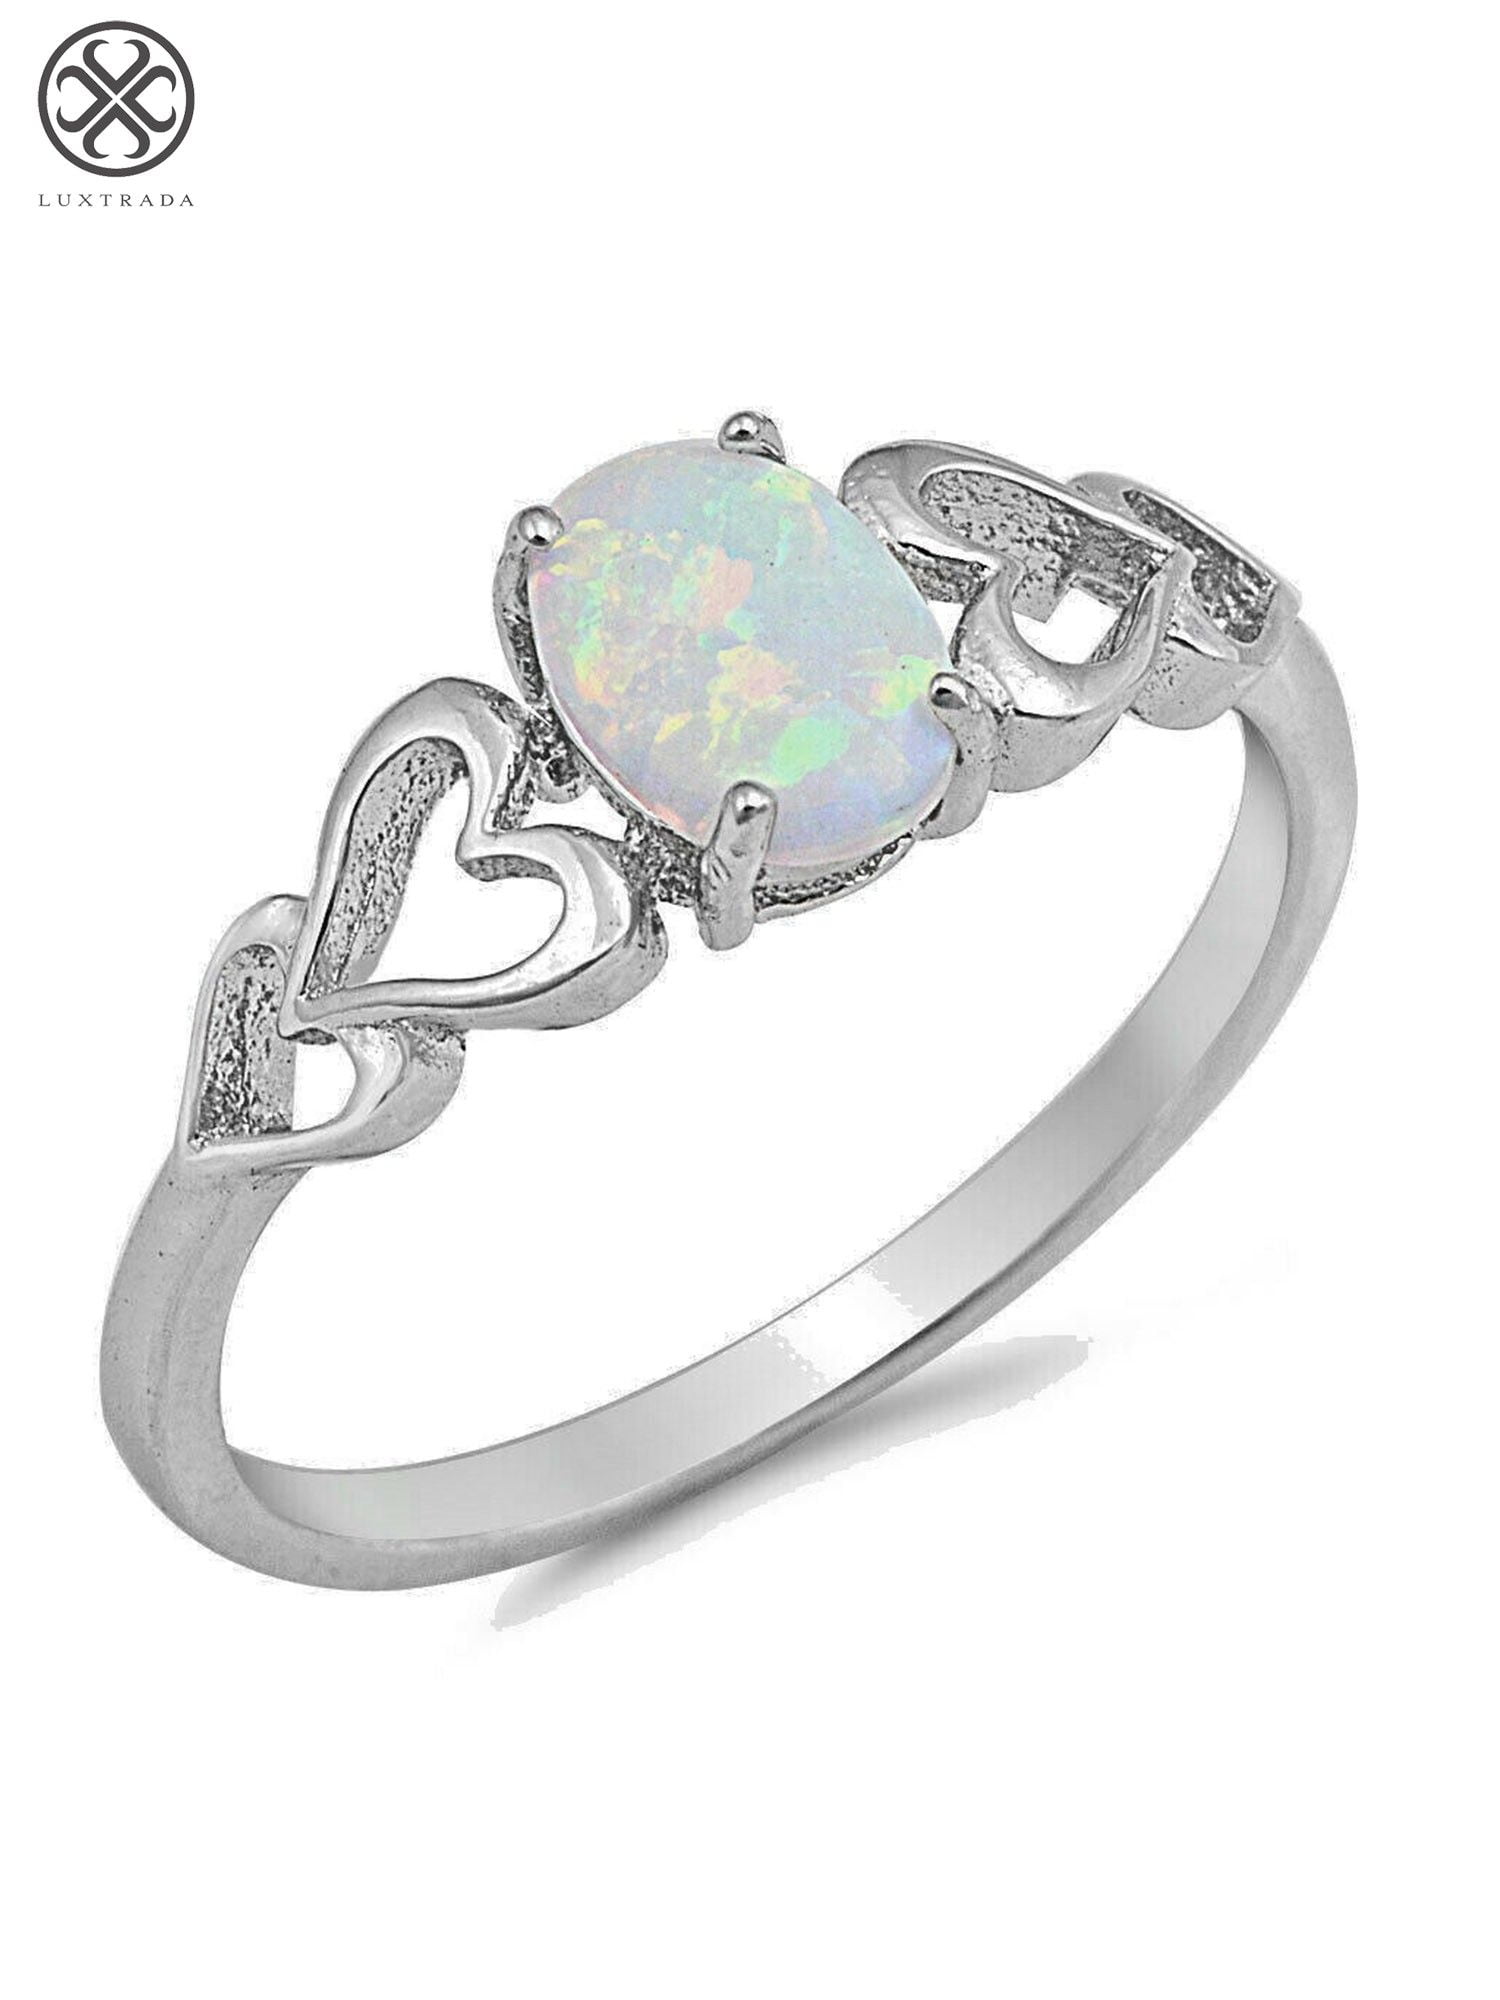 925 Silver White Oval Cut Fire Opal CZ Ring Womens Wedding Jewelry Gift Size6-10